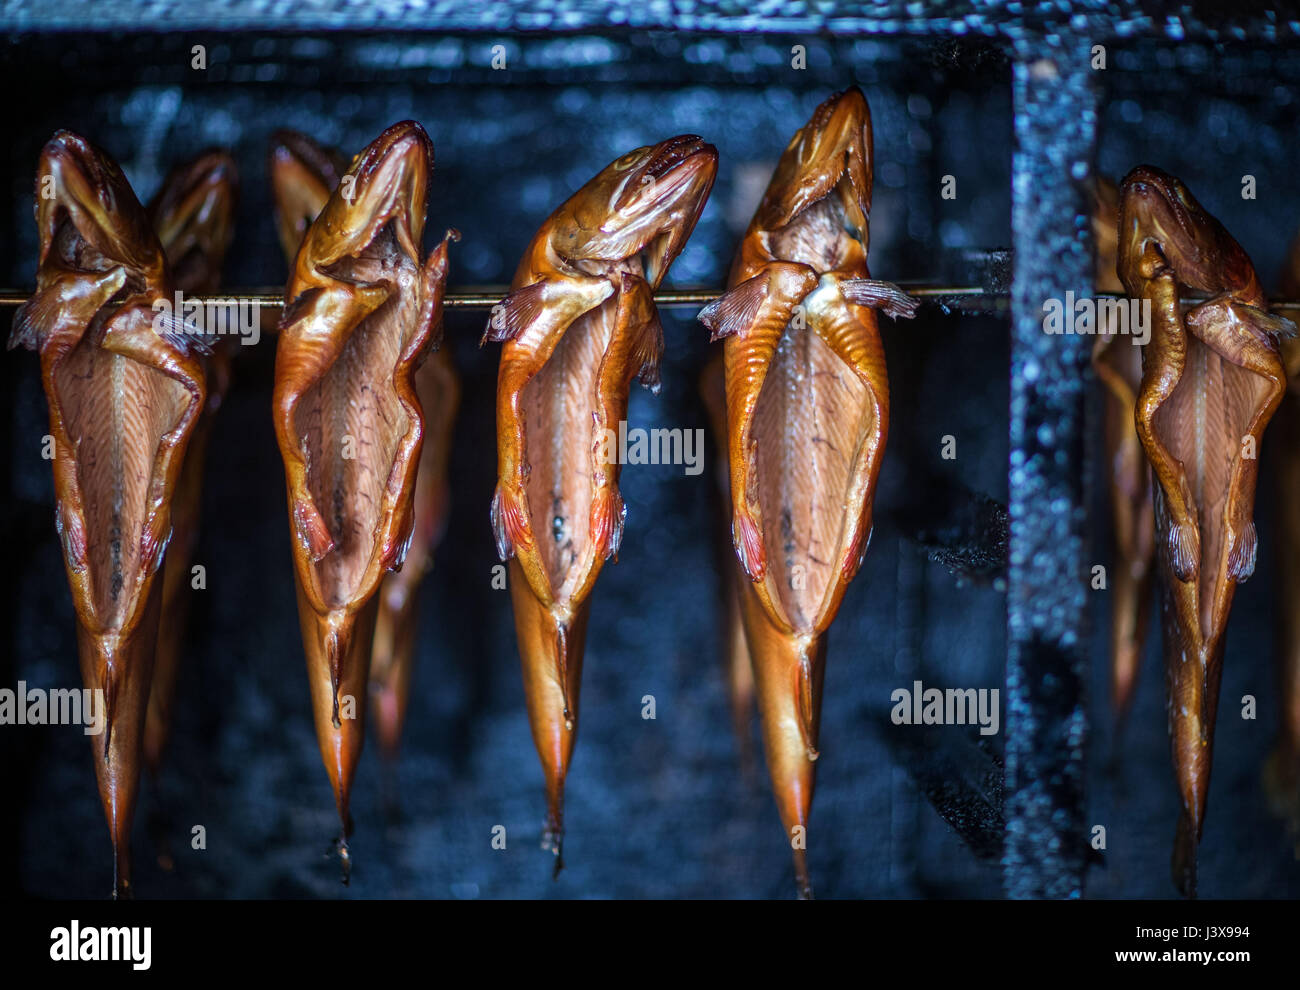 Vipperow, Germany. 4th May, 2017. Freshly smoked char fish can be seen hanging in an oven at the fish farm at the Mueritz in Vipperow, Germany, 4 May 2017. The fish farm is part of the largest inland fishery in Germany: Fishery Mueitz-Plau GmbH. Besides the tradition fishery and the breeding of fish, modern aqua culture is also part of the business. The fishery, founded in 1990 from the former production cooperative (founded 1952) holds more than 30.000 hectars of water. Photo: Jens Büttner/dpa-Zentralbild/dpa/Alamy Live News Stock Photo